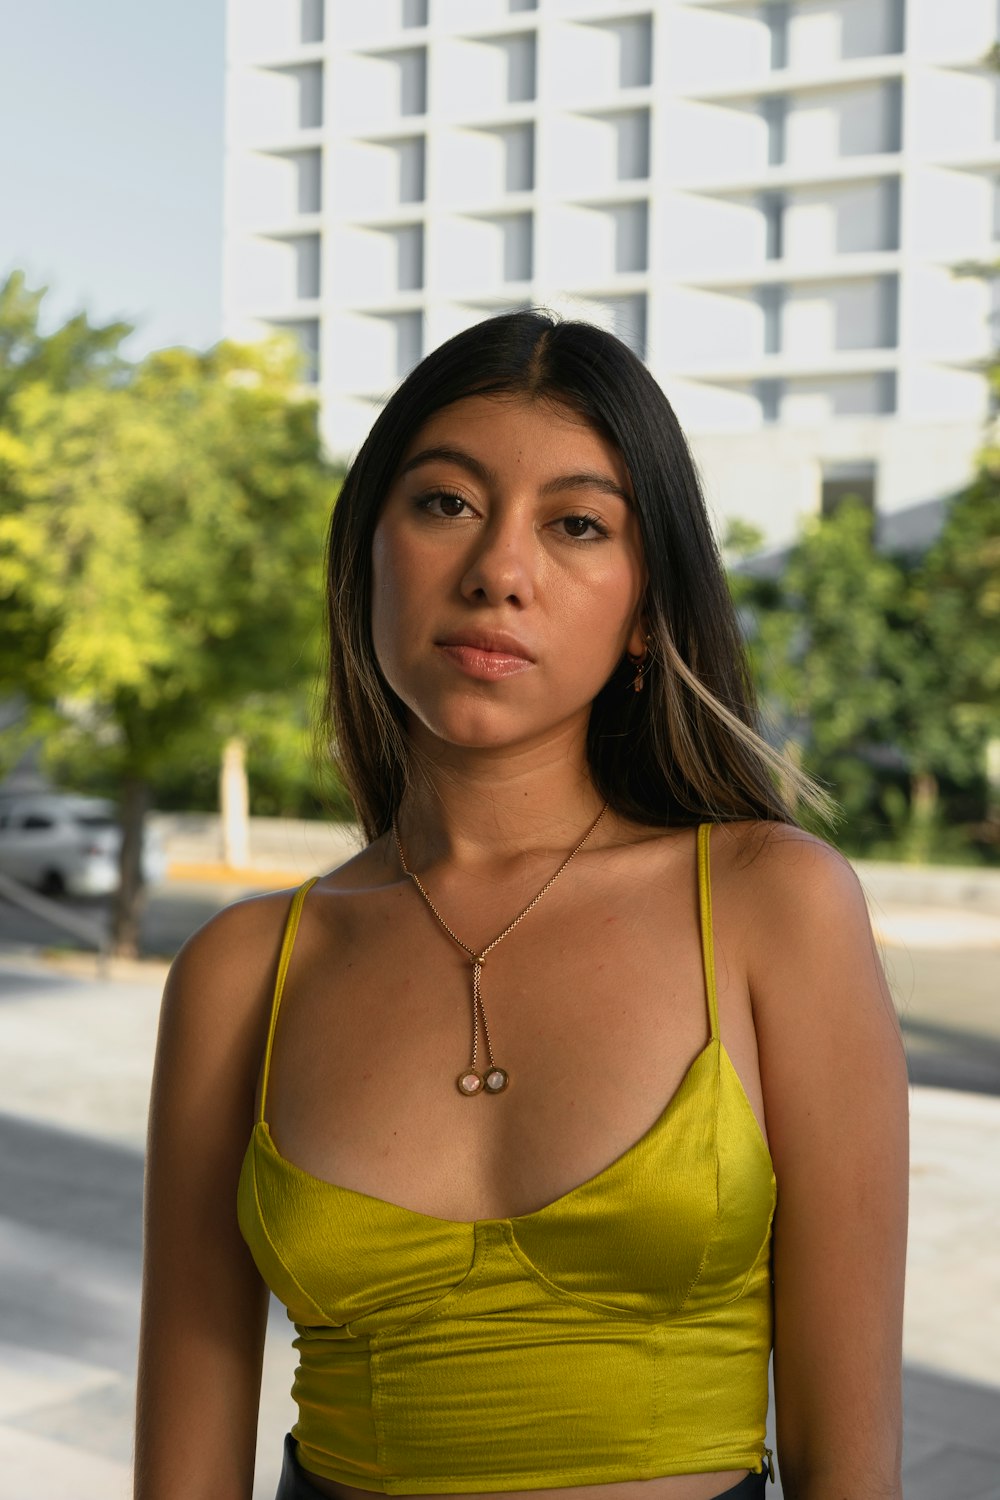 a woman in a yellow top posing for a picture